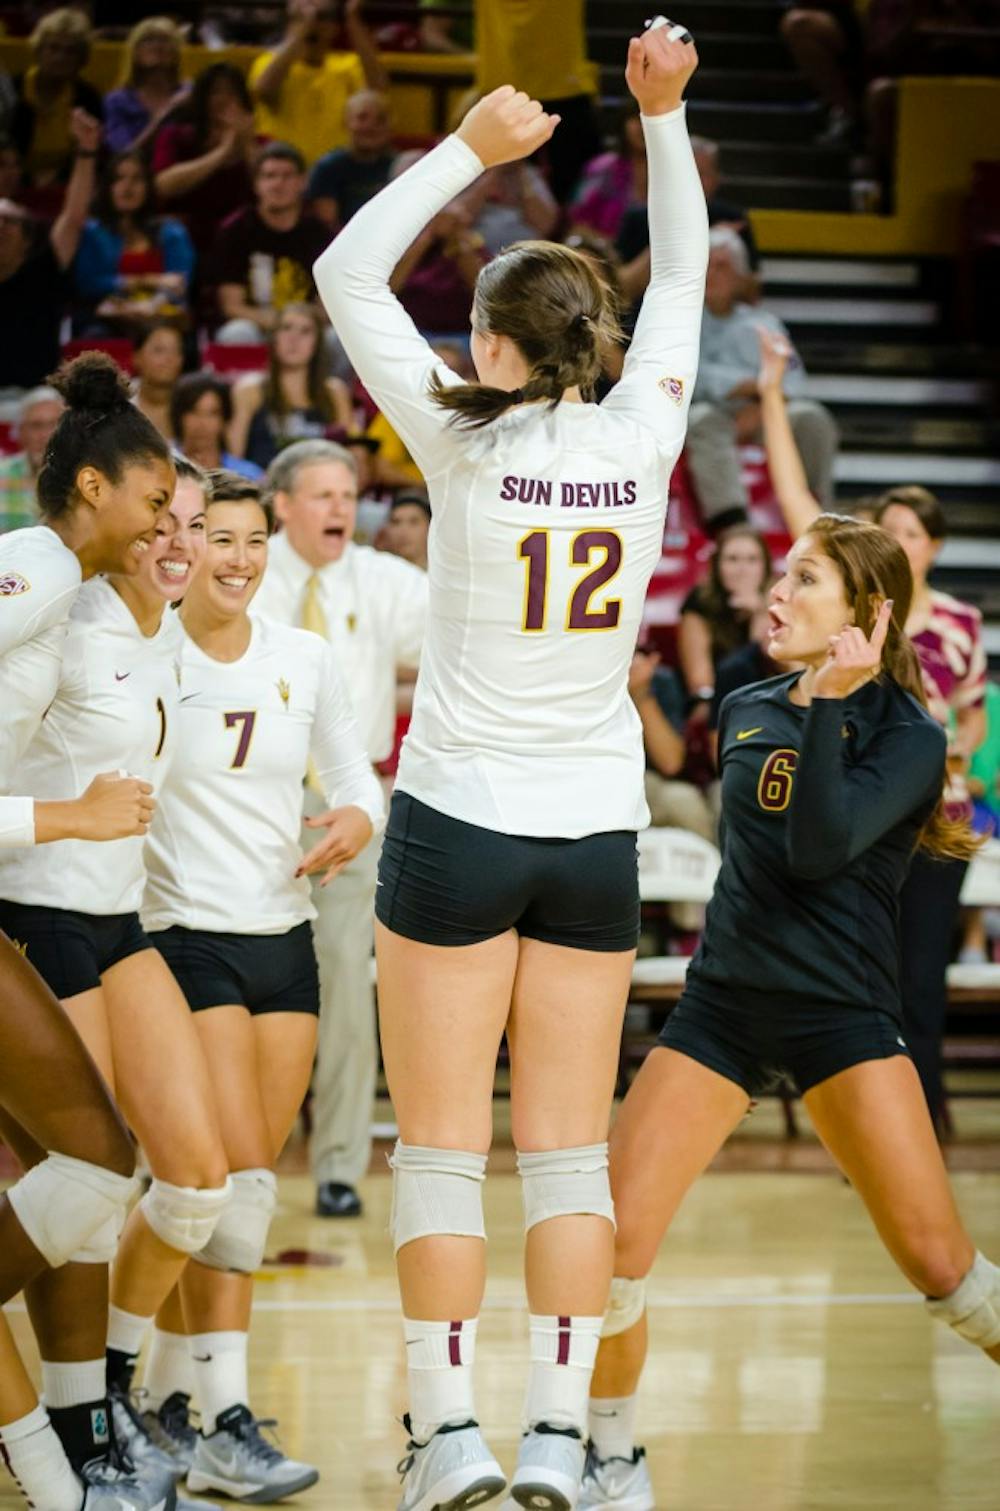 ASU Volleyball team keeping the energy high in the final match versus U of A.